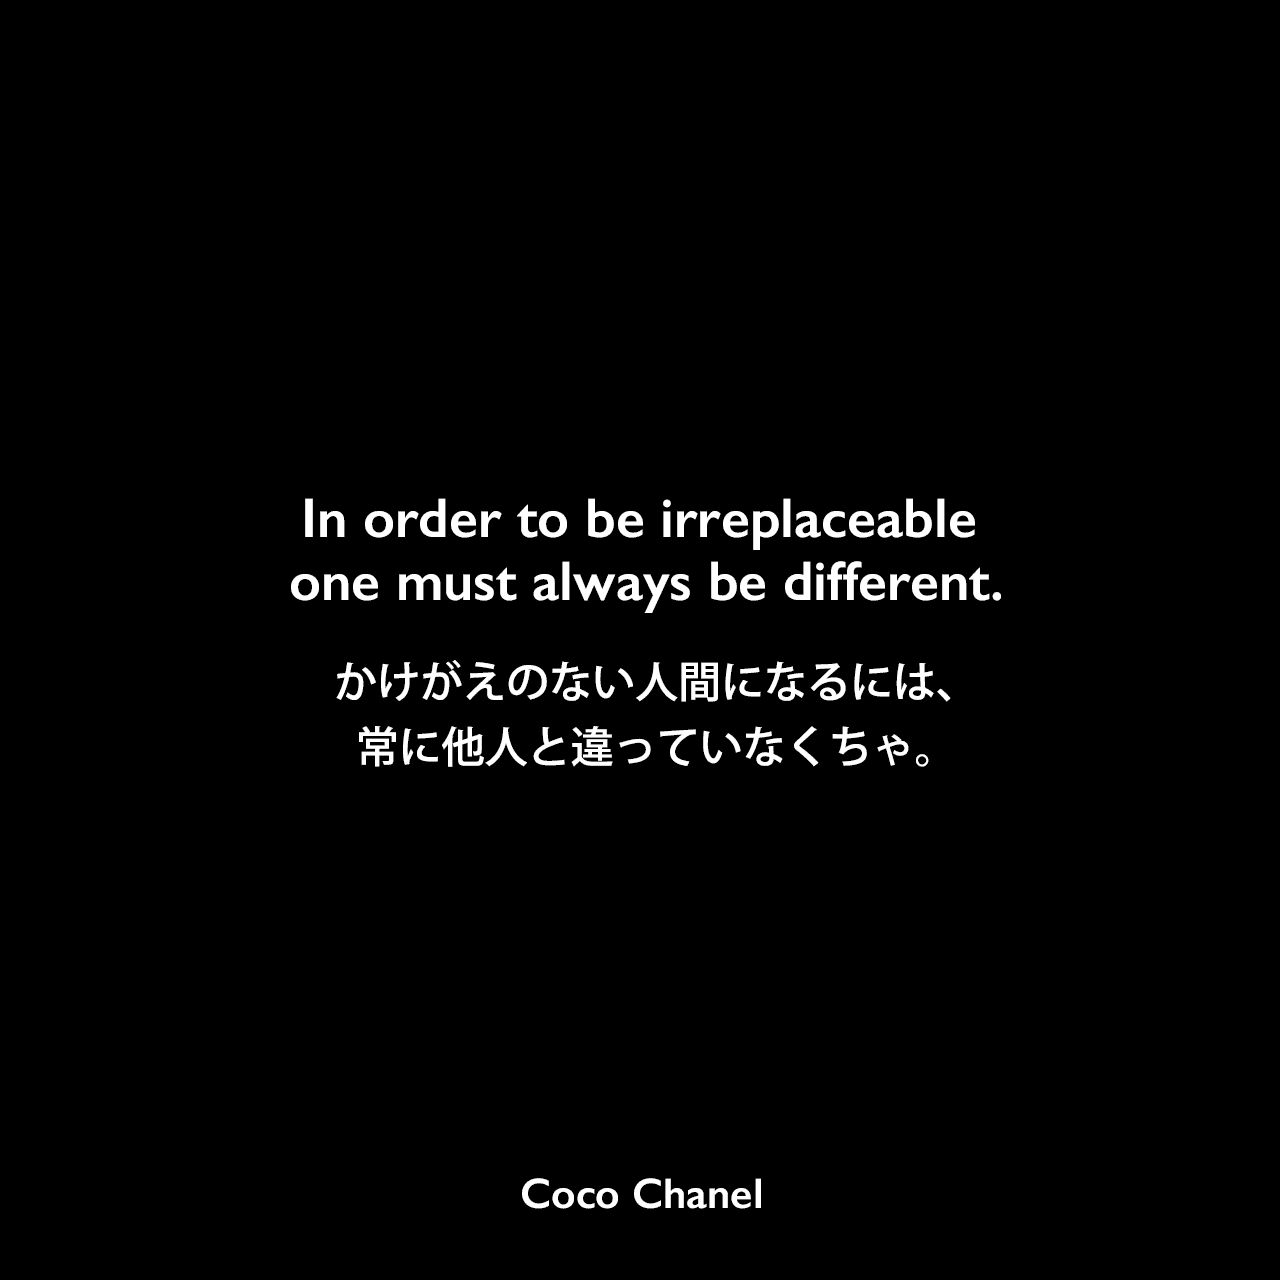 In order to be irreplaceable one must always be different.かけがえのない人間になるには、常に他人と違っていなくちゃ。- マルセル・ヘードリッヒの本「Coco Chanel : Her Life, Her Secrets」より